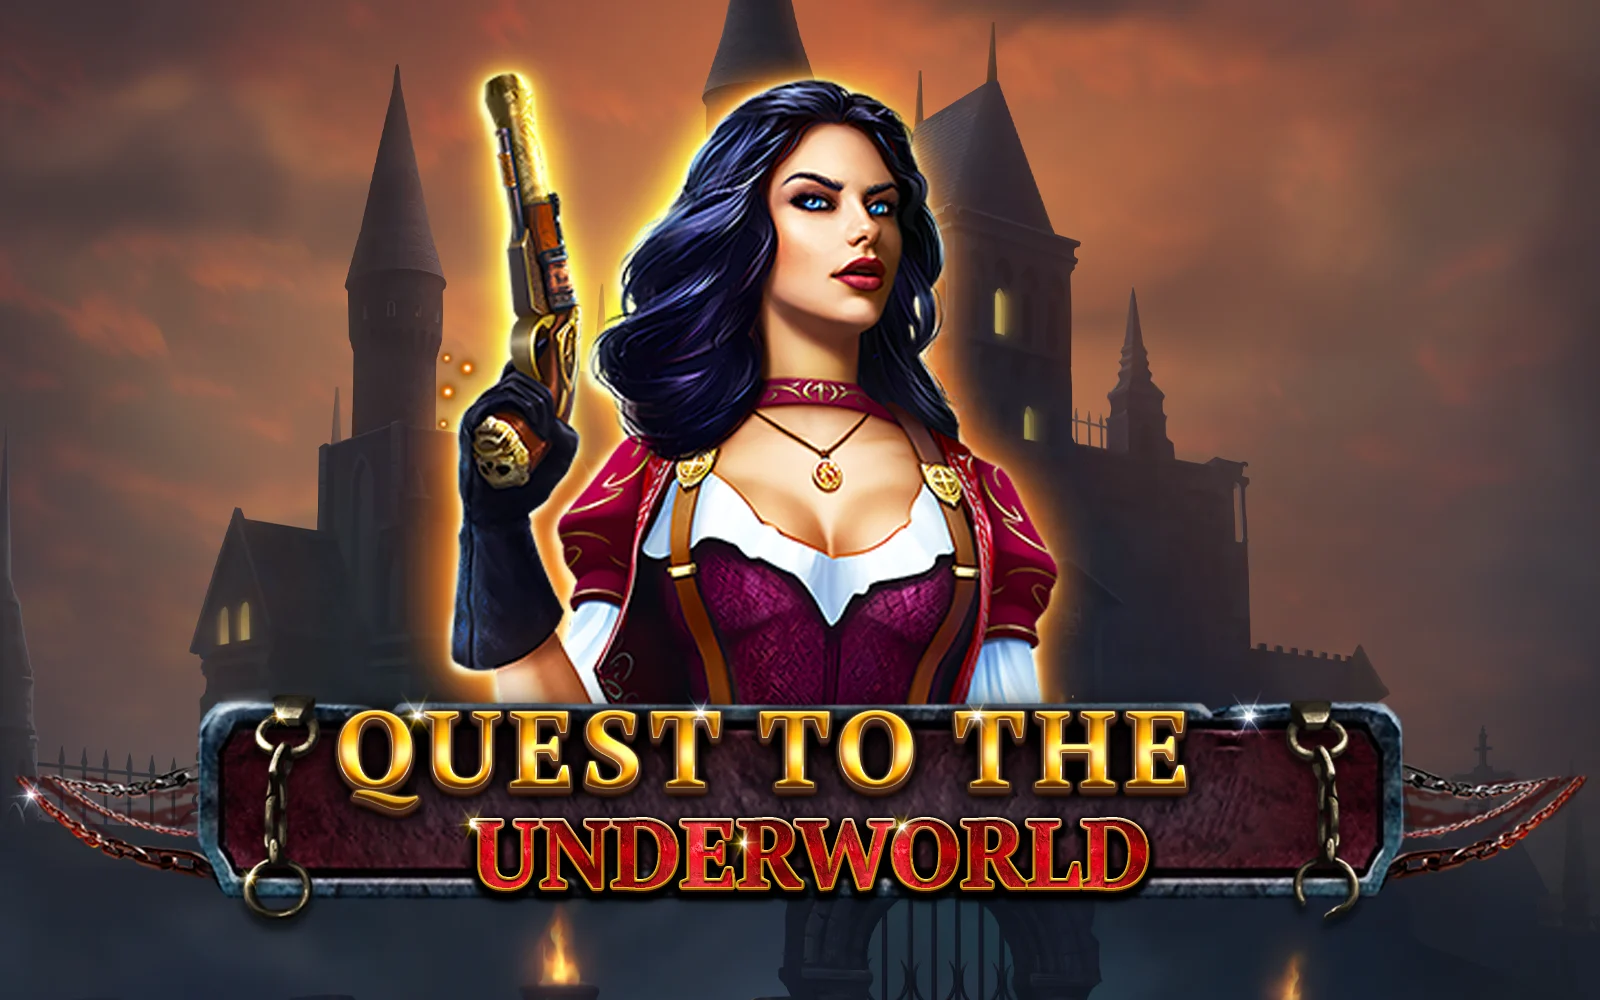 Play Quest to the Underworld on Starcasino.be online casino